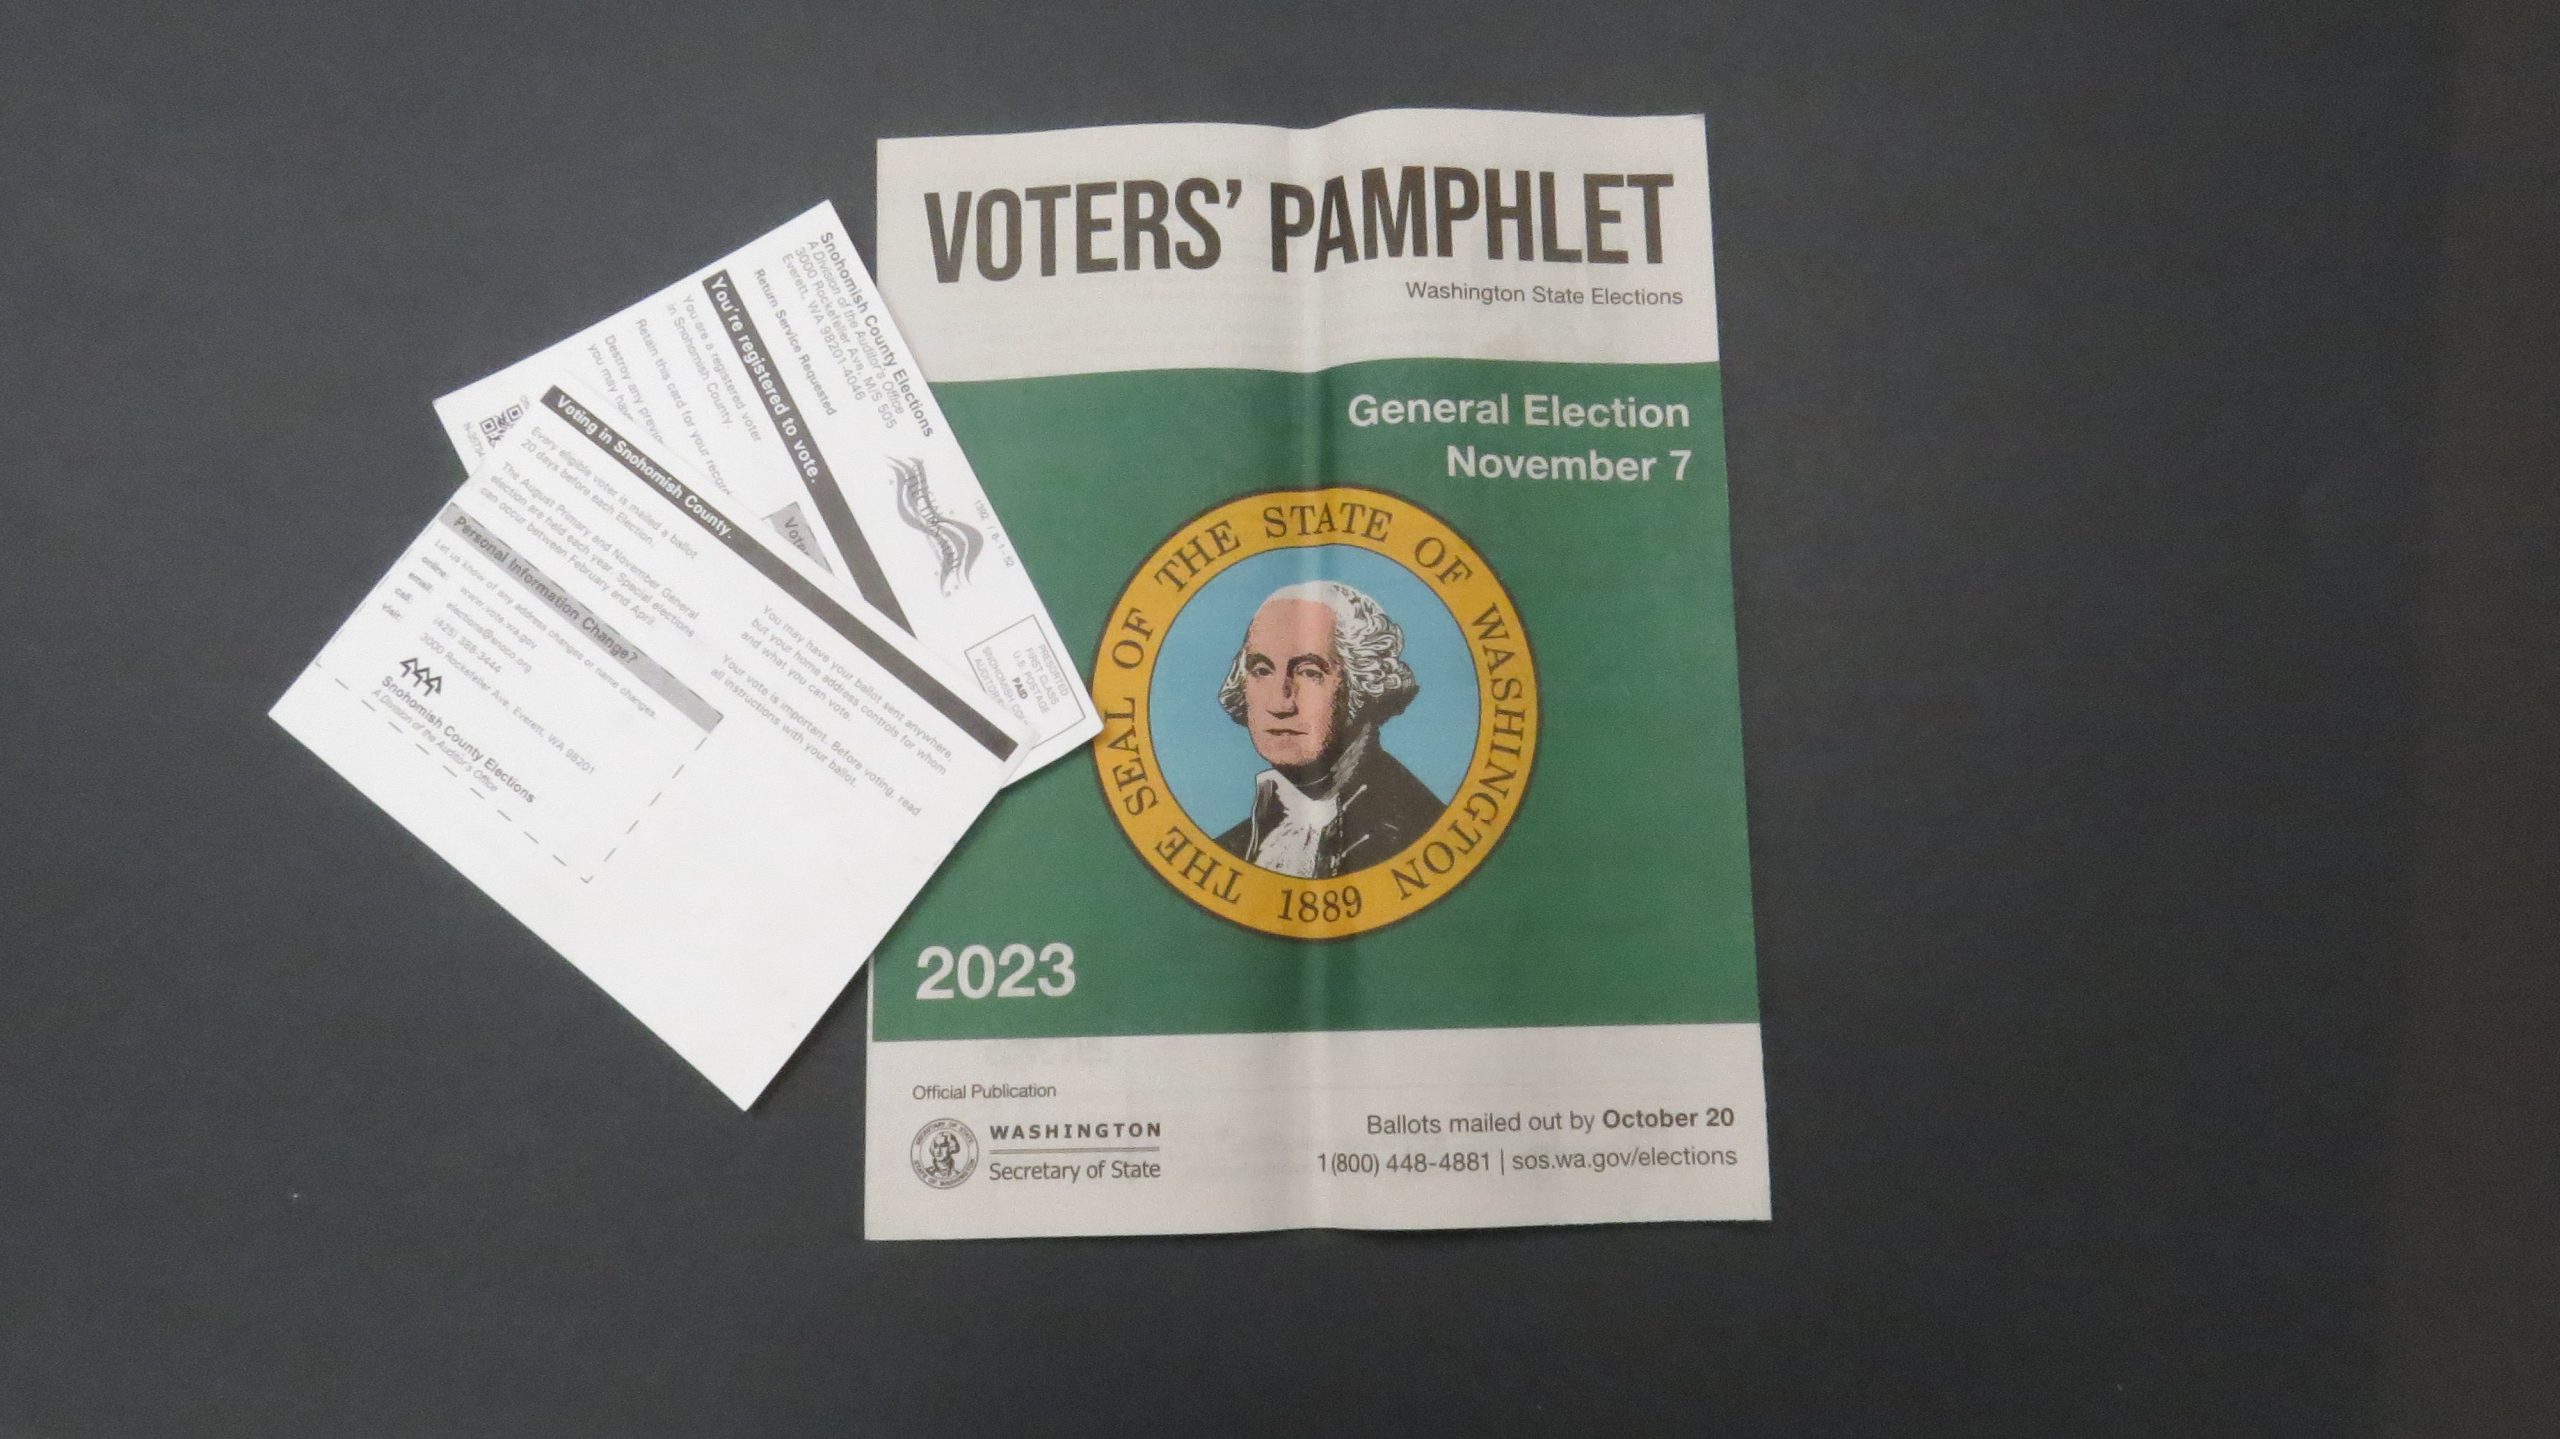 Washington voter registration cards prove voter eligibility, and a  2023 Washington state voter pamphlet provides information about all of the candidates in the upcoming elections. Ballots must be postmarked by Nov. 7, 2023.